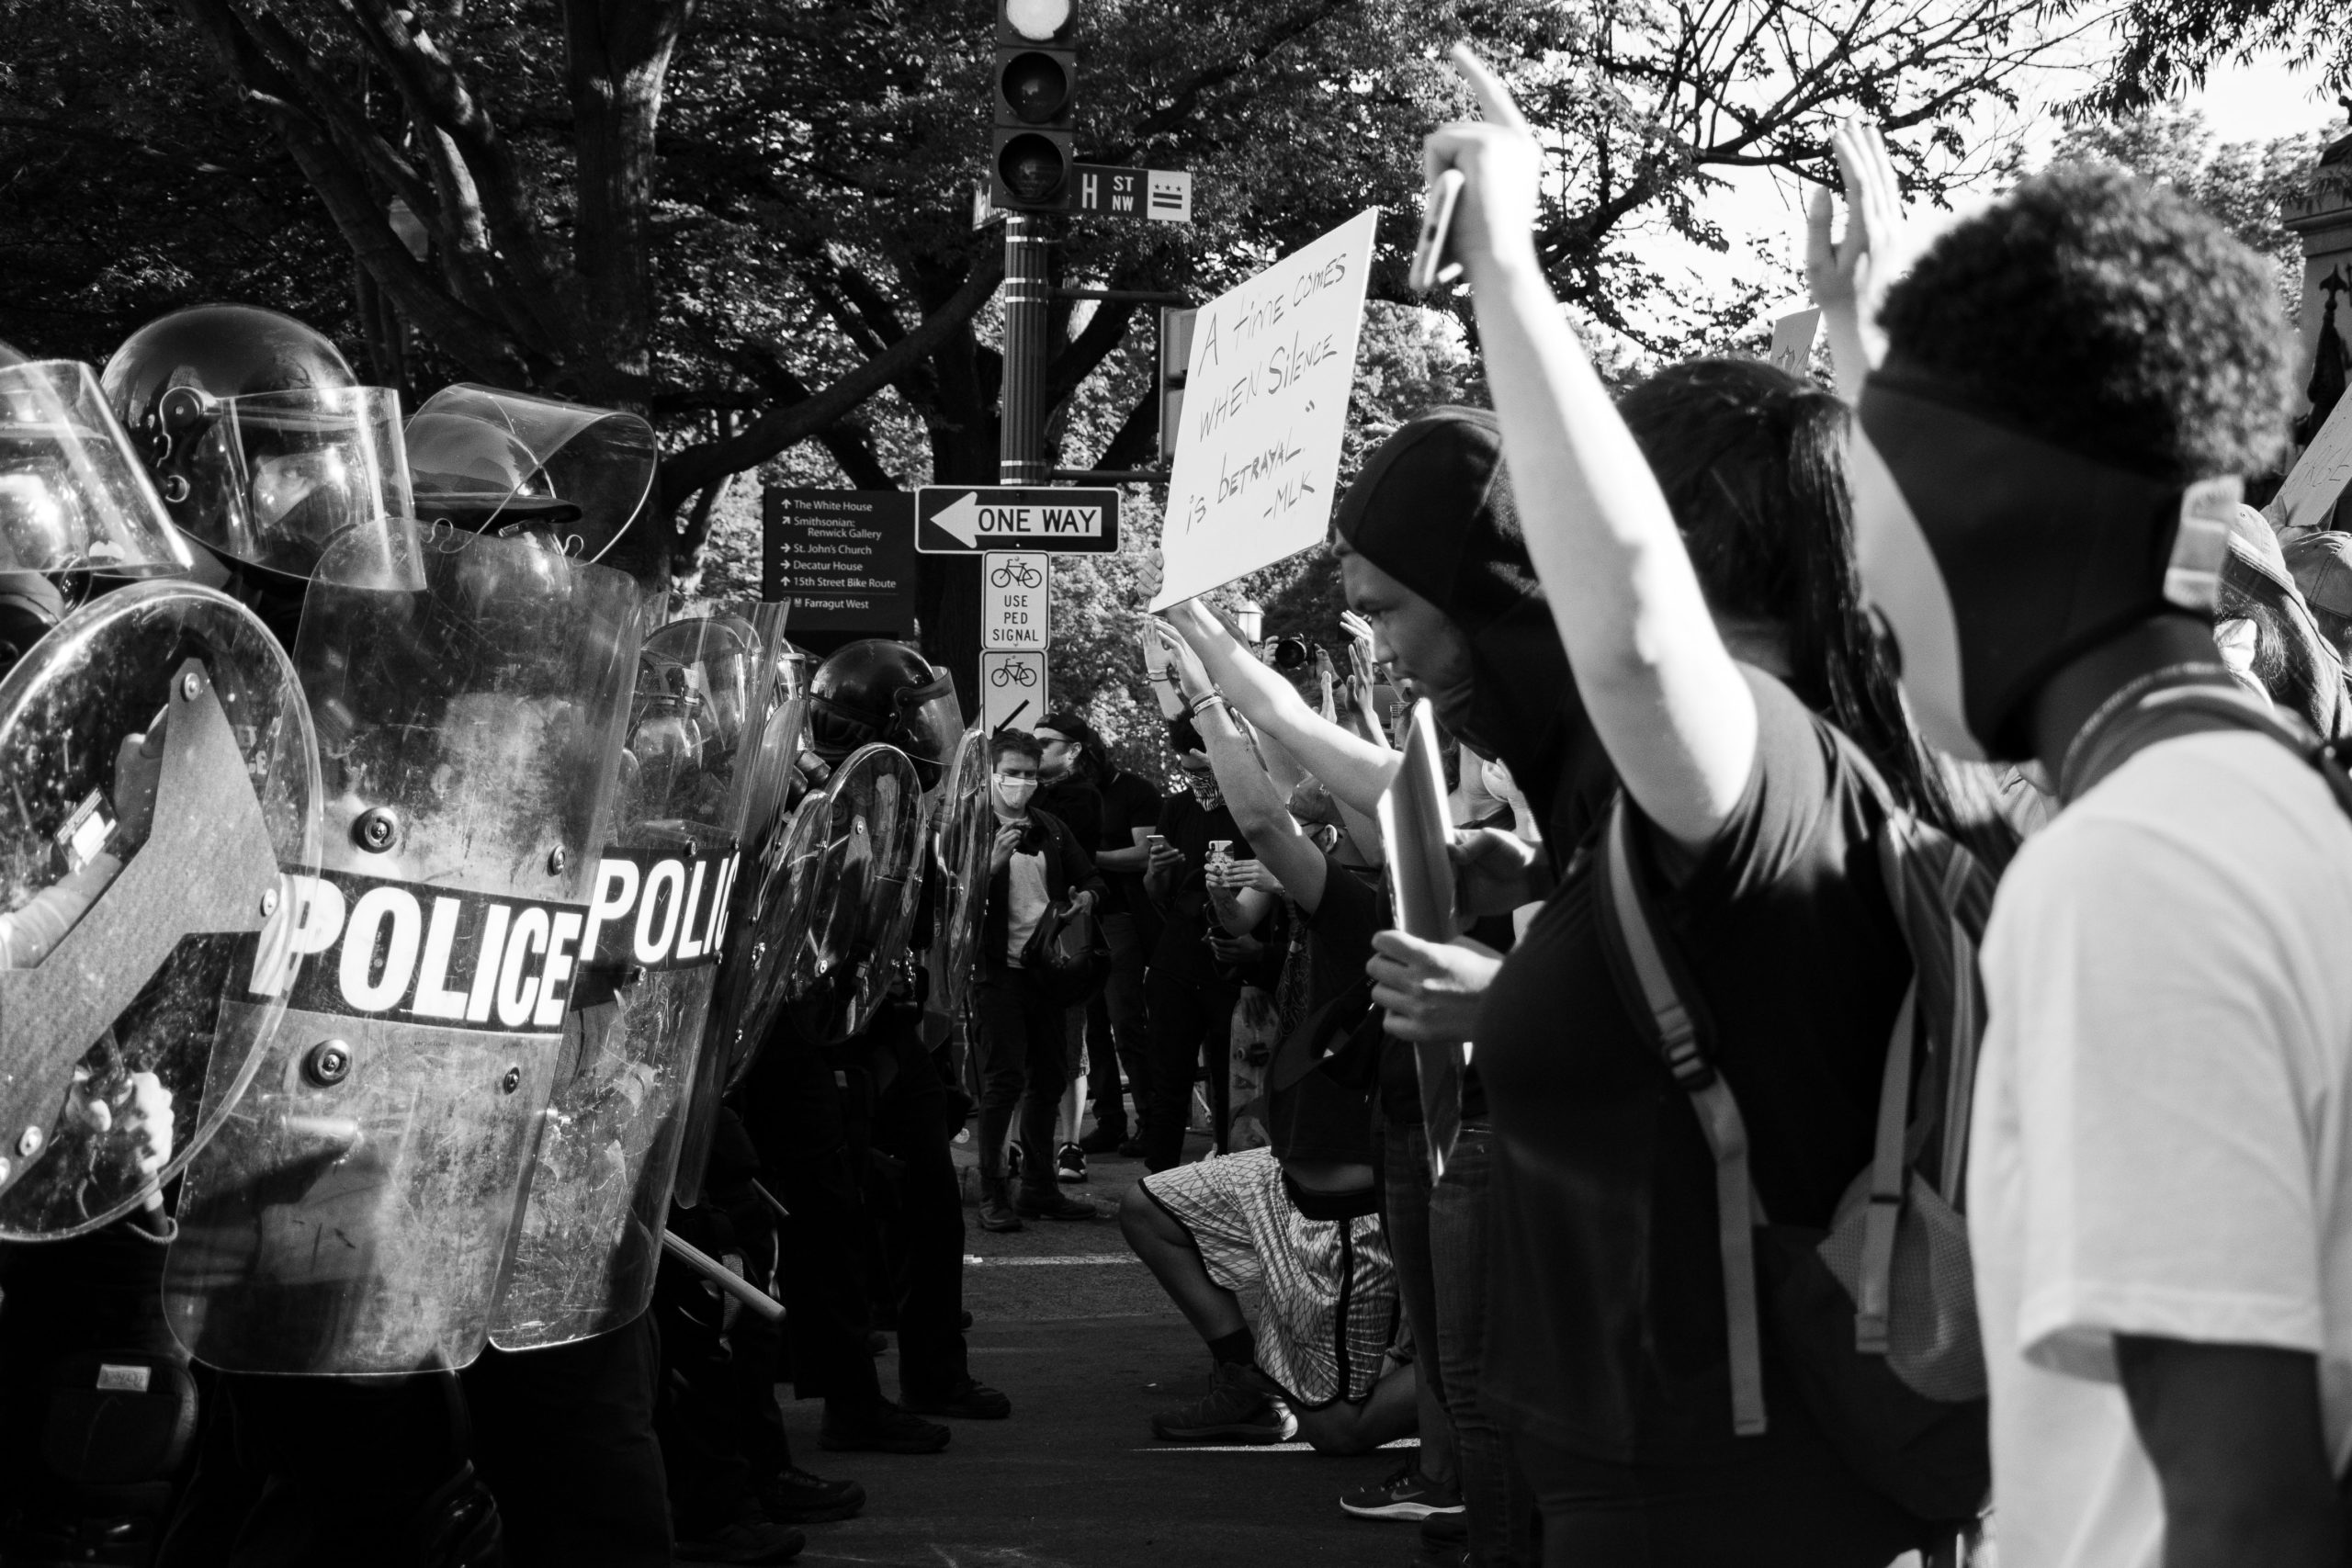 To the left of the black and white image, there is a row of police in gear and facing across from them, there is a row of protesters with signs.